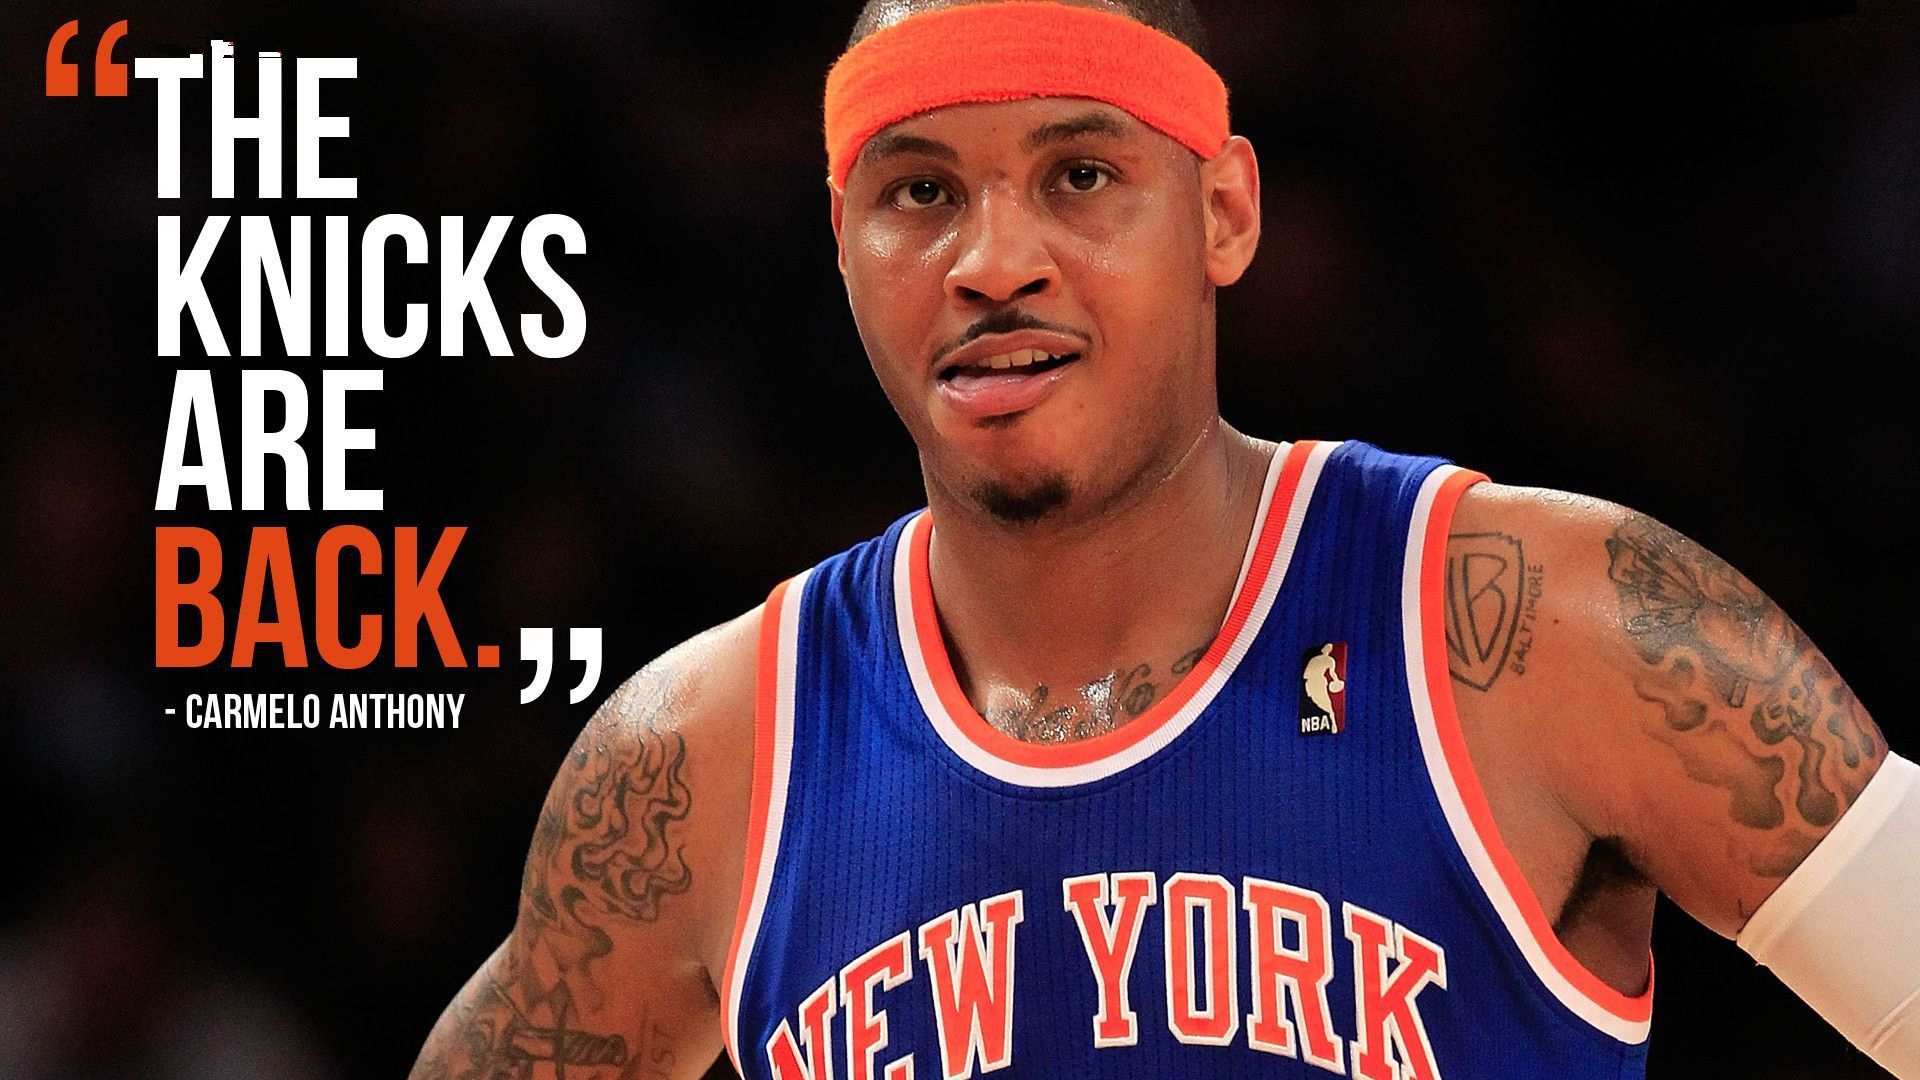 Carmelo Anthony Hd Wallpaper - Carmelo Anthony New York Knicks , HD Wallpaper & Backgrounds